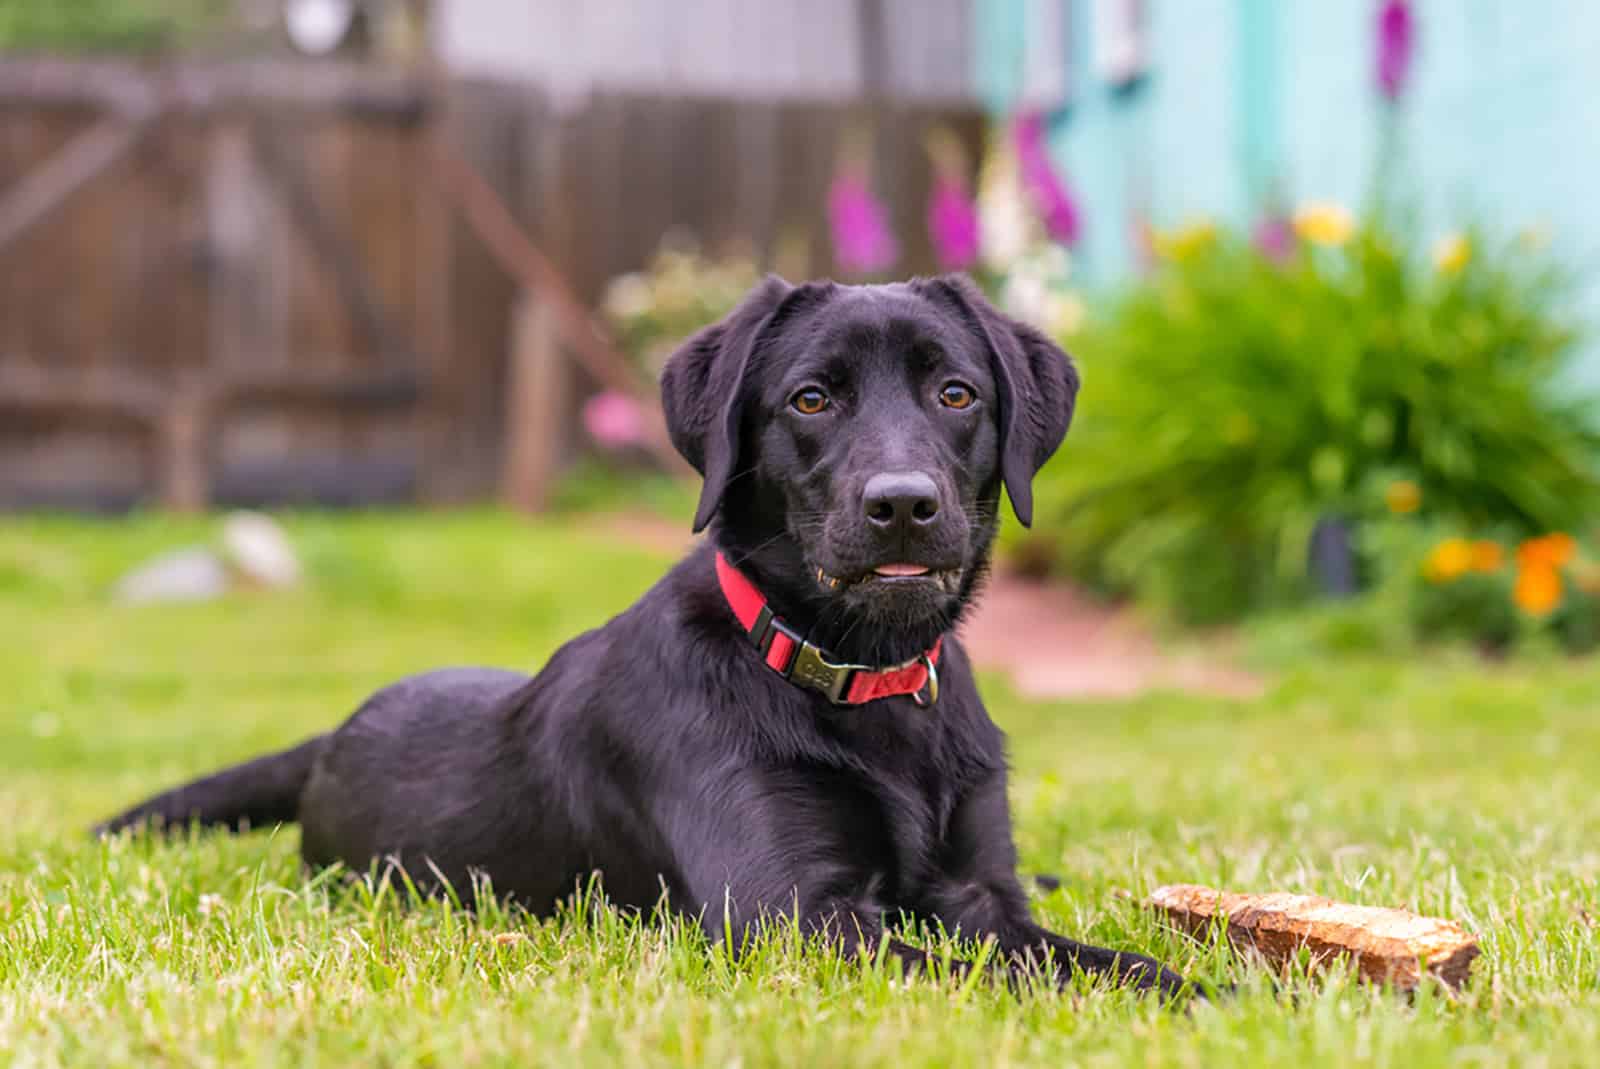 Black Lab Breeders: Top 6 Choices In The USA